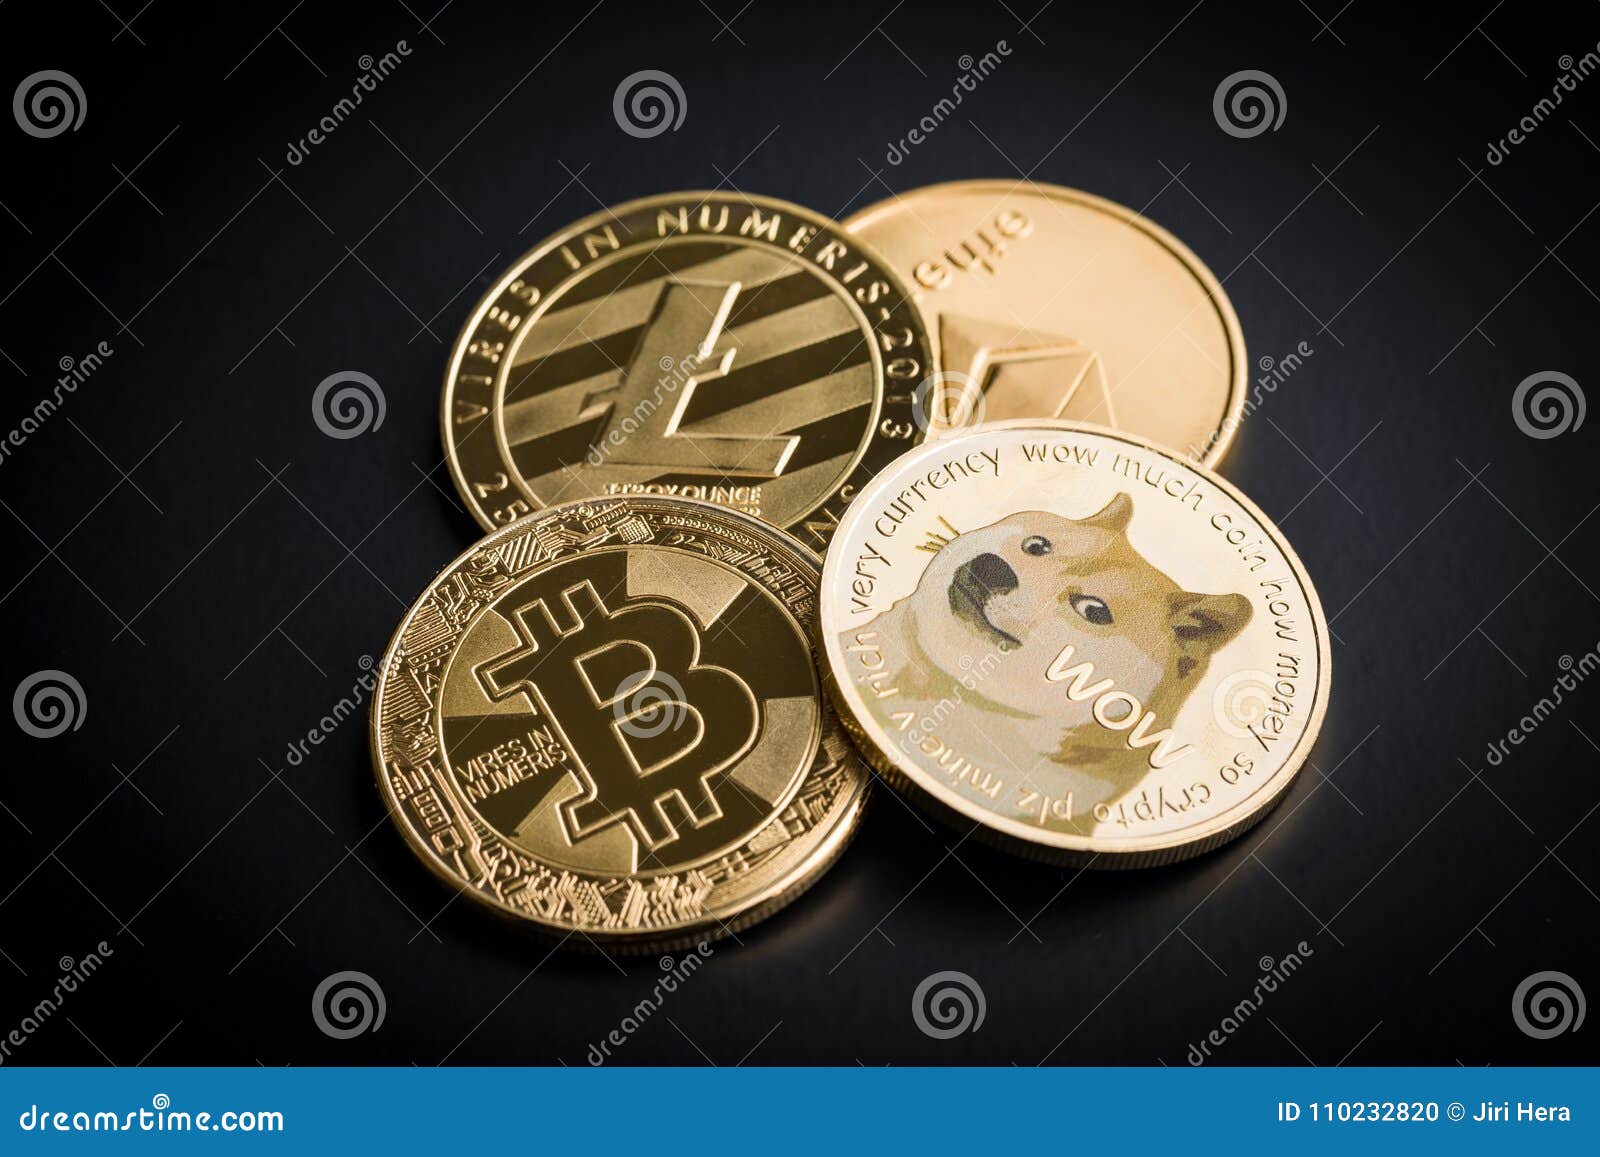 Doge Coin To Cad - Dogecoin Price (DOGE/CAD)